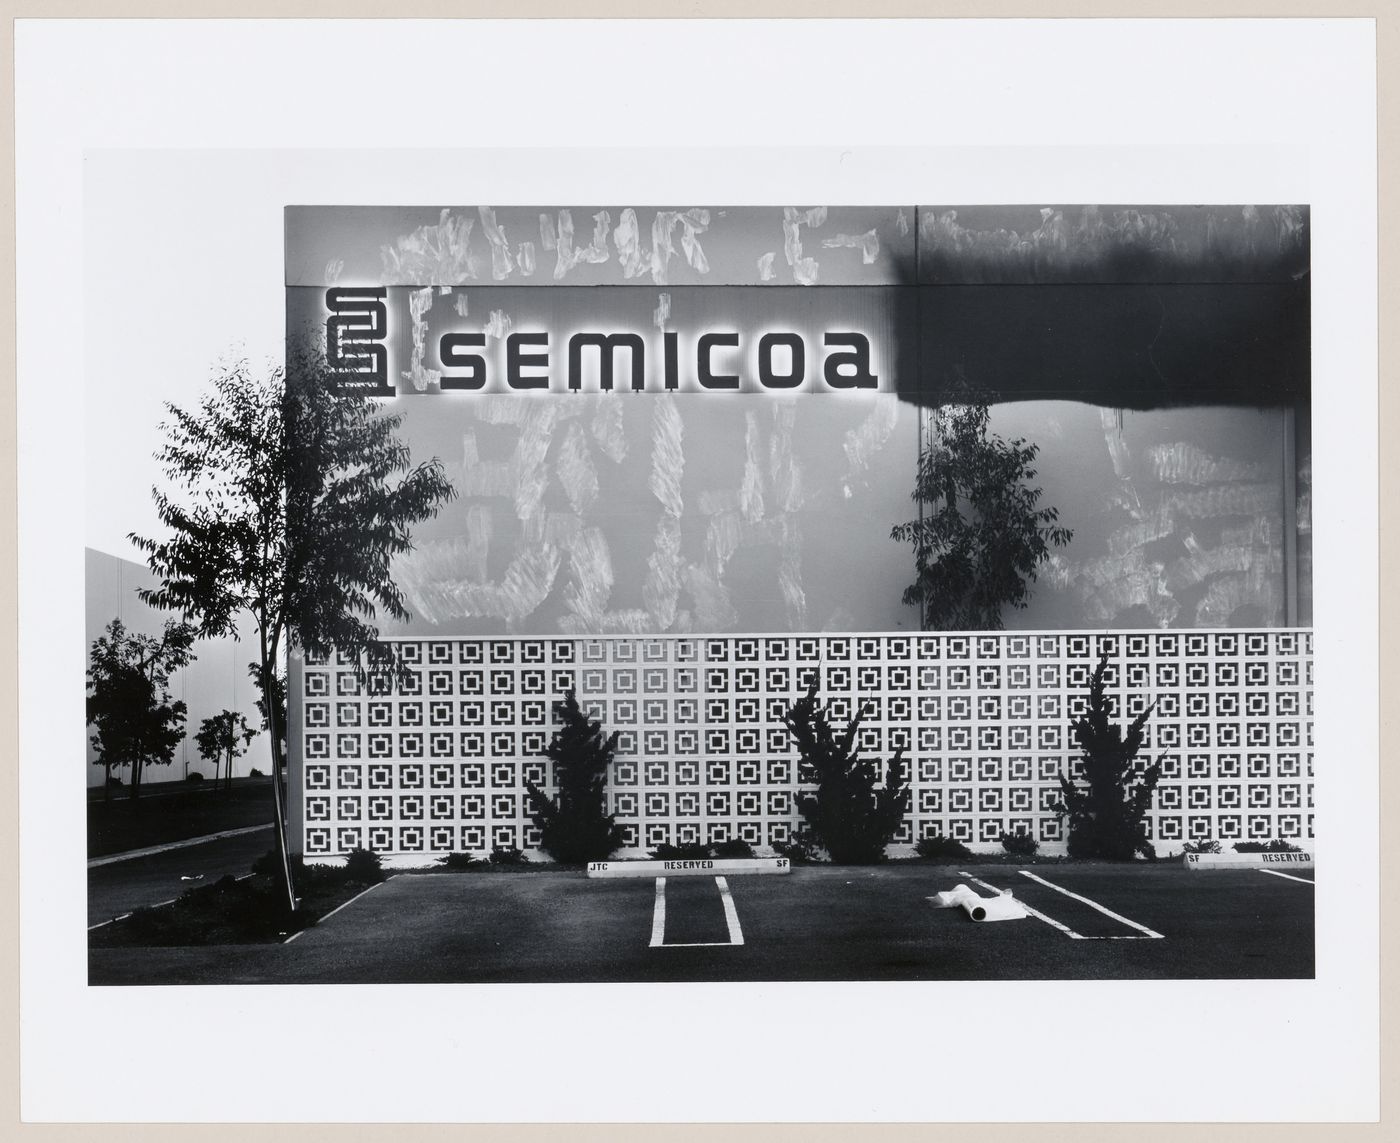 View of the north wall of Semicoa, 333 McCormick, Costa Mesa, California, United States, from the series “The new Industrial Parks near Irvine, California”